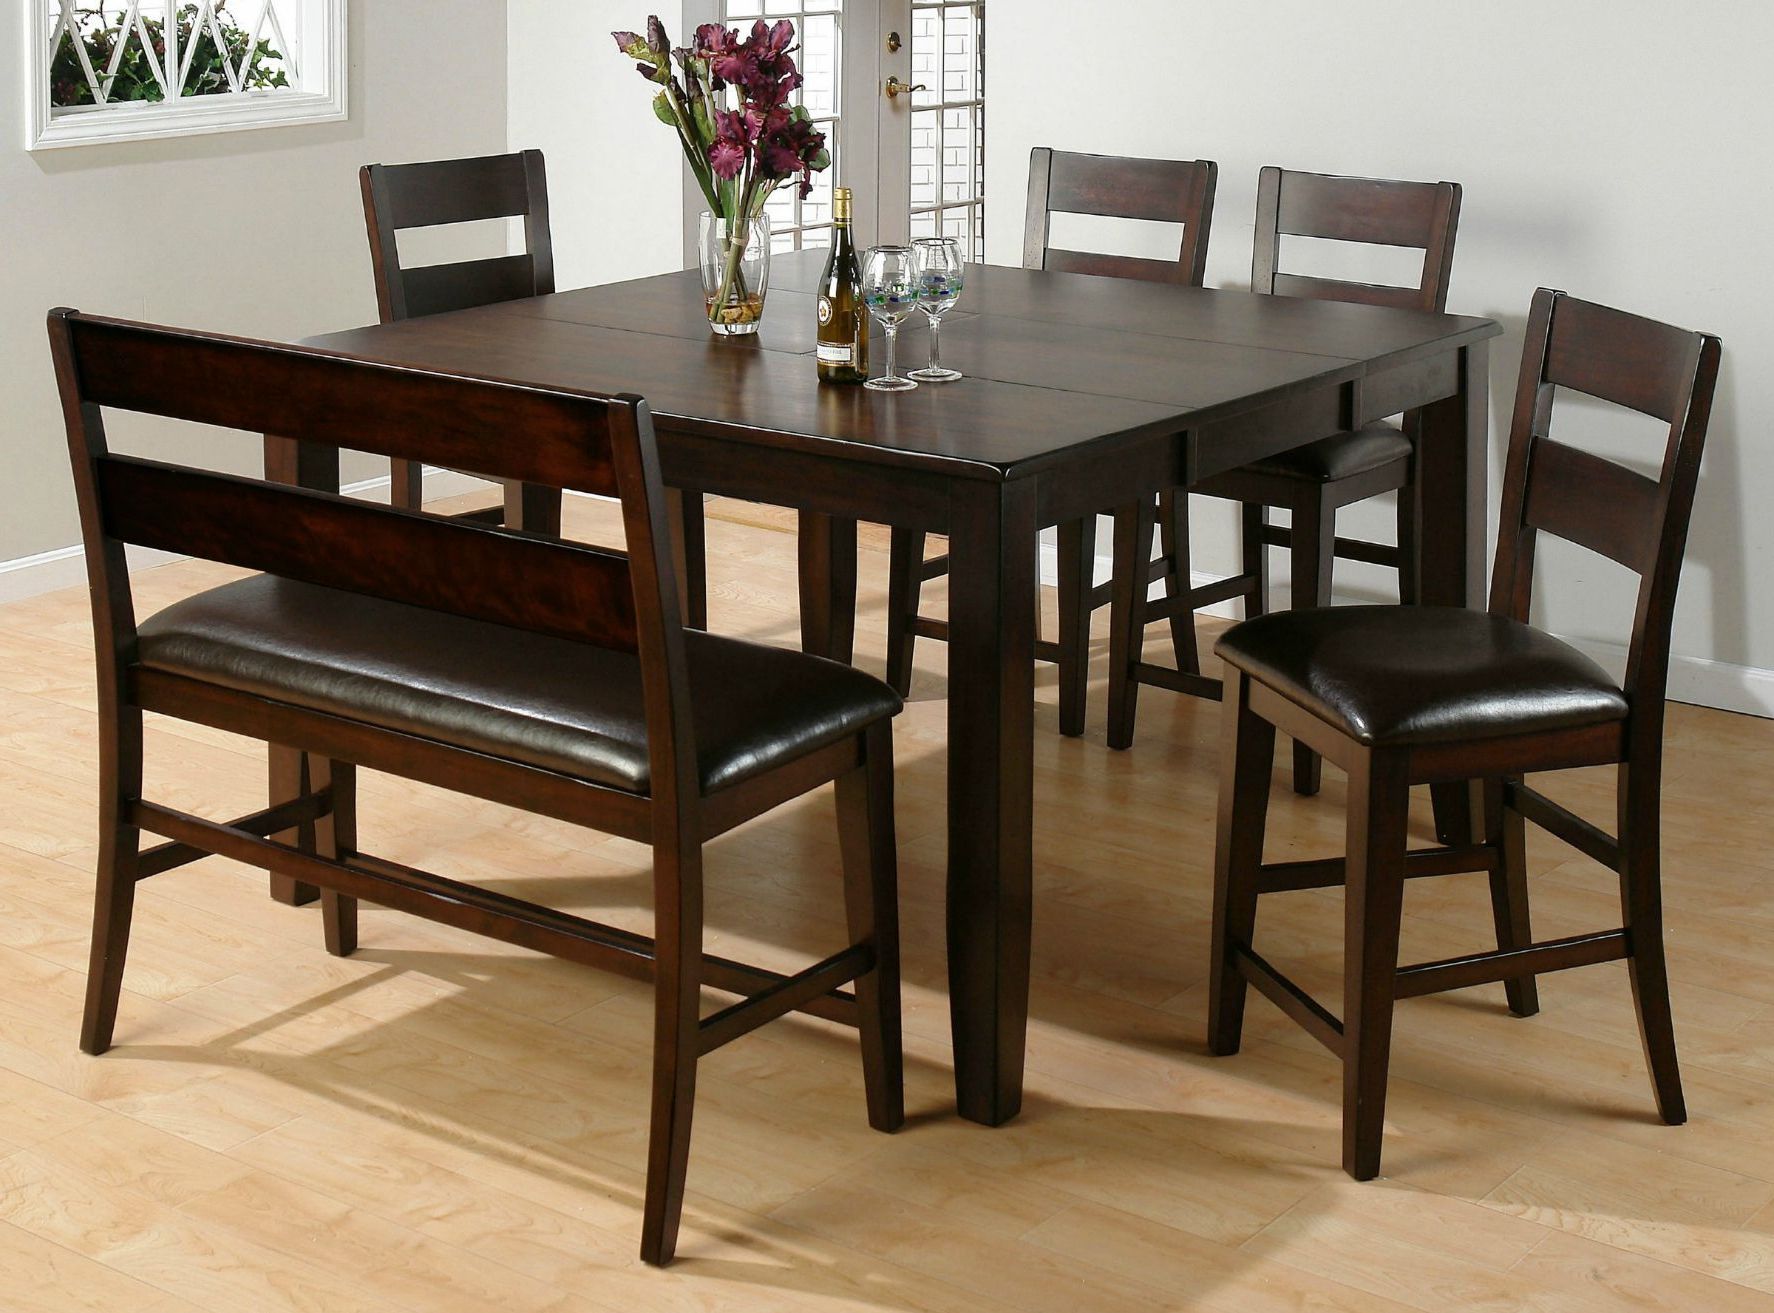 26 Dining Room Sets (big And Small) With Bench Seating (2020 With Most Popular Transitional 4 Seating Double Drop Leaf Casual Dining Tables (Photo 3 of 30)